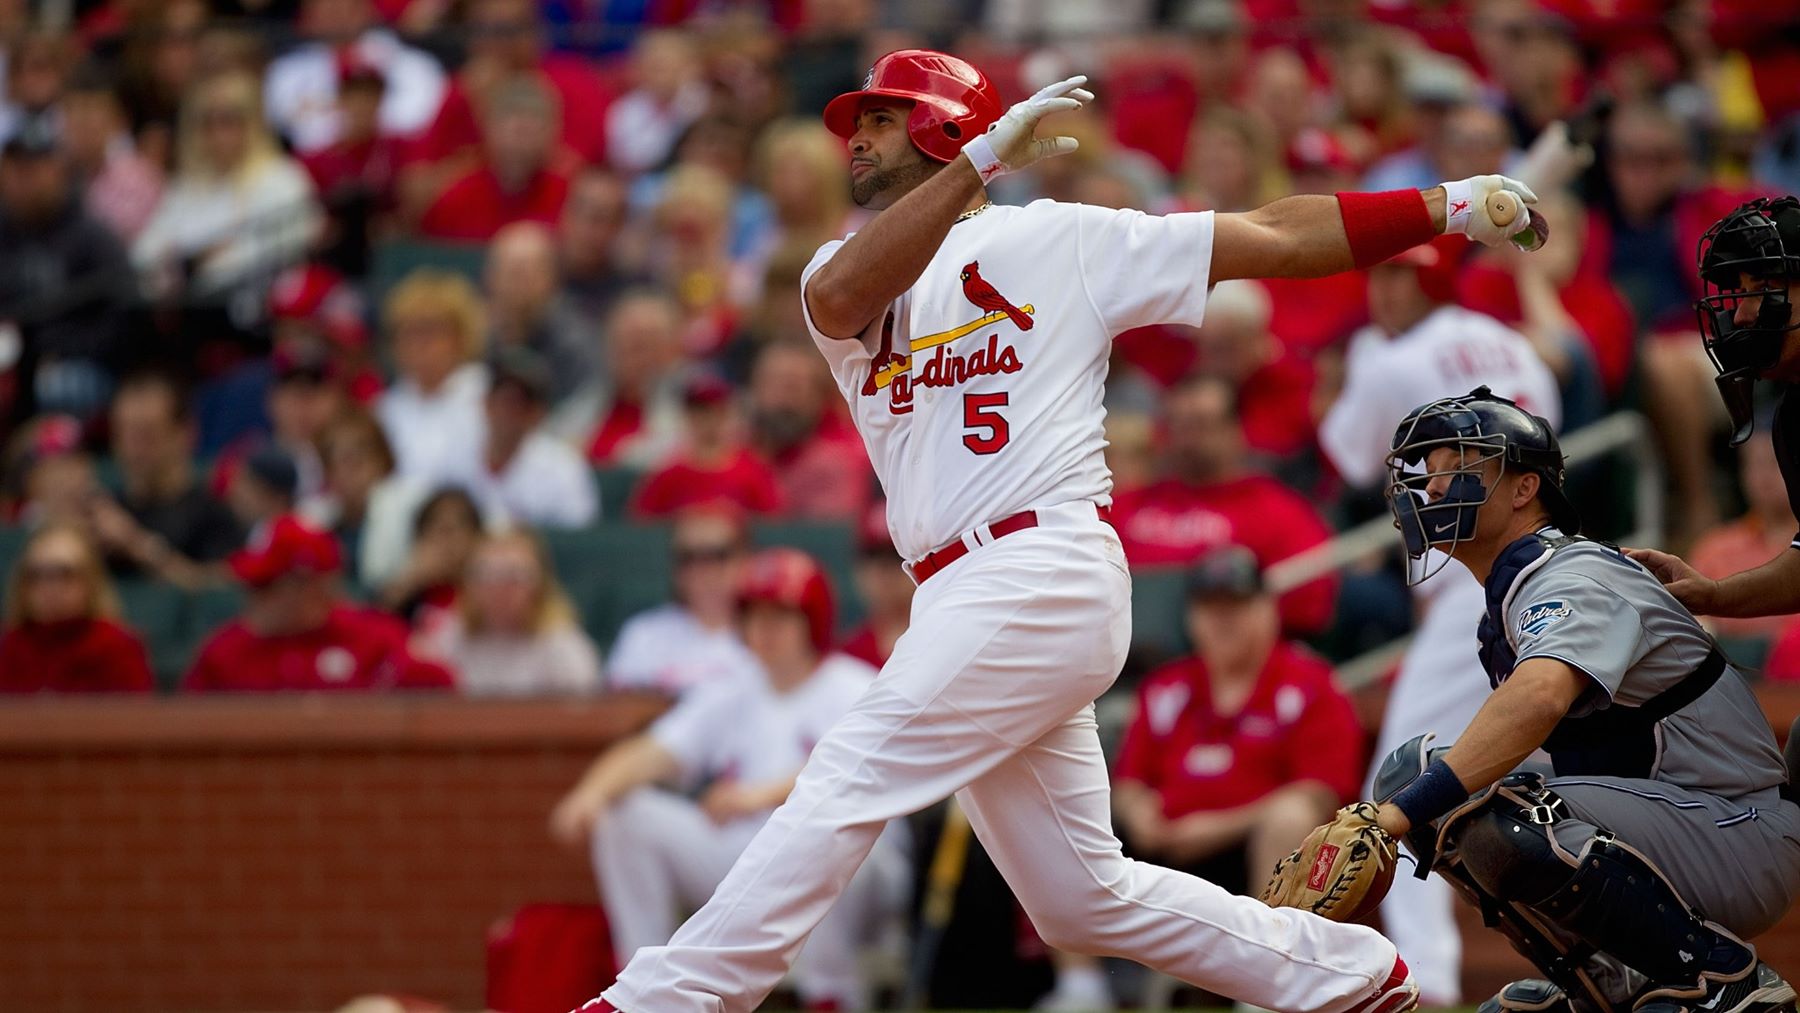 How To Watch Cardinals Baseball Without Cable